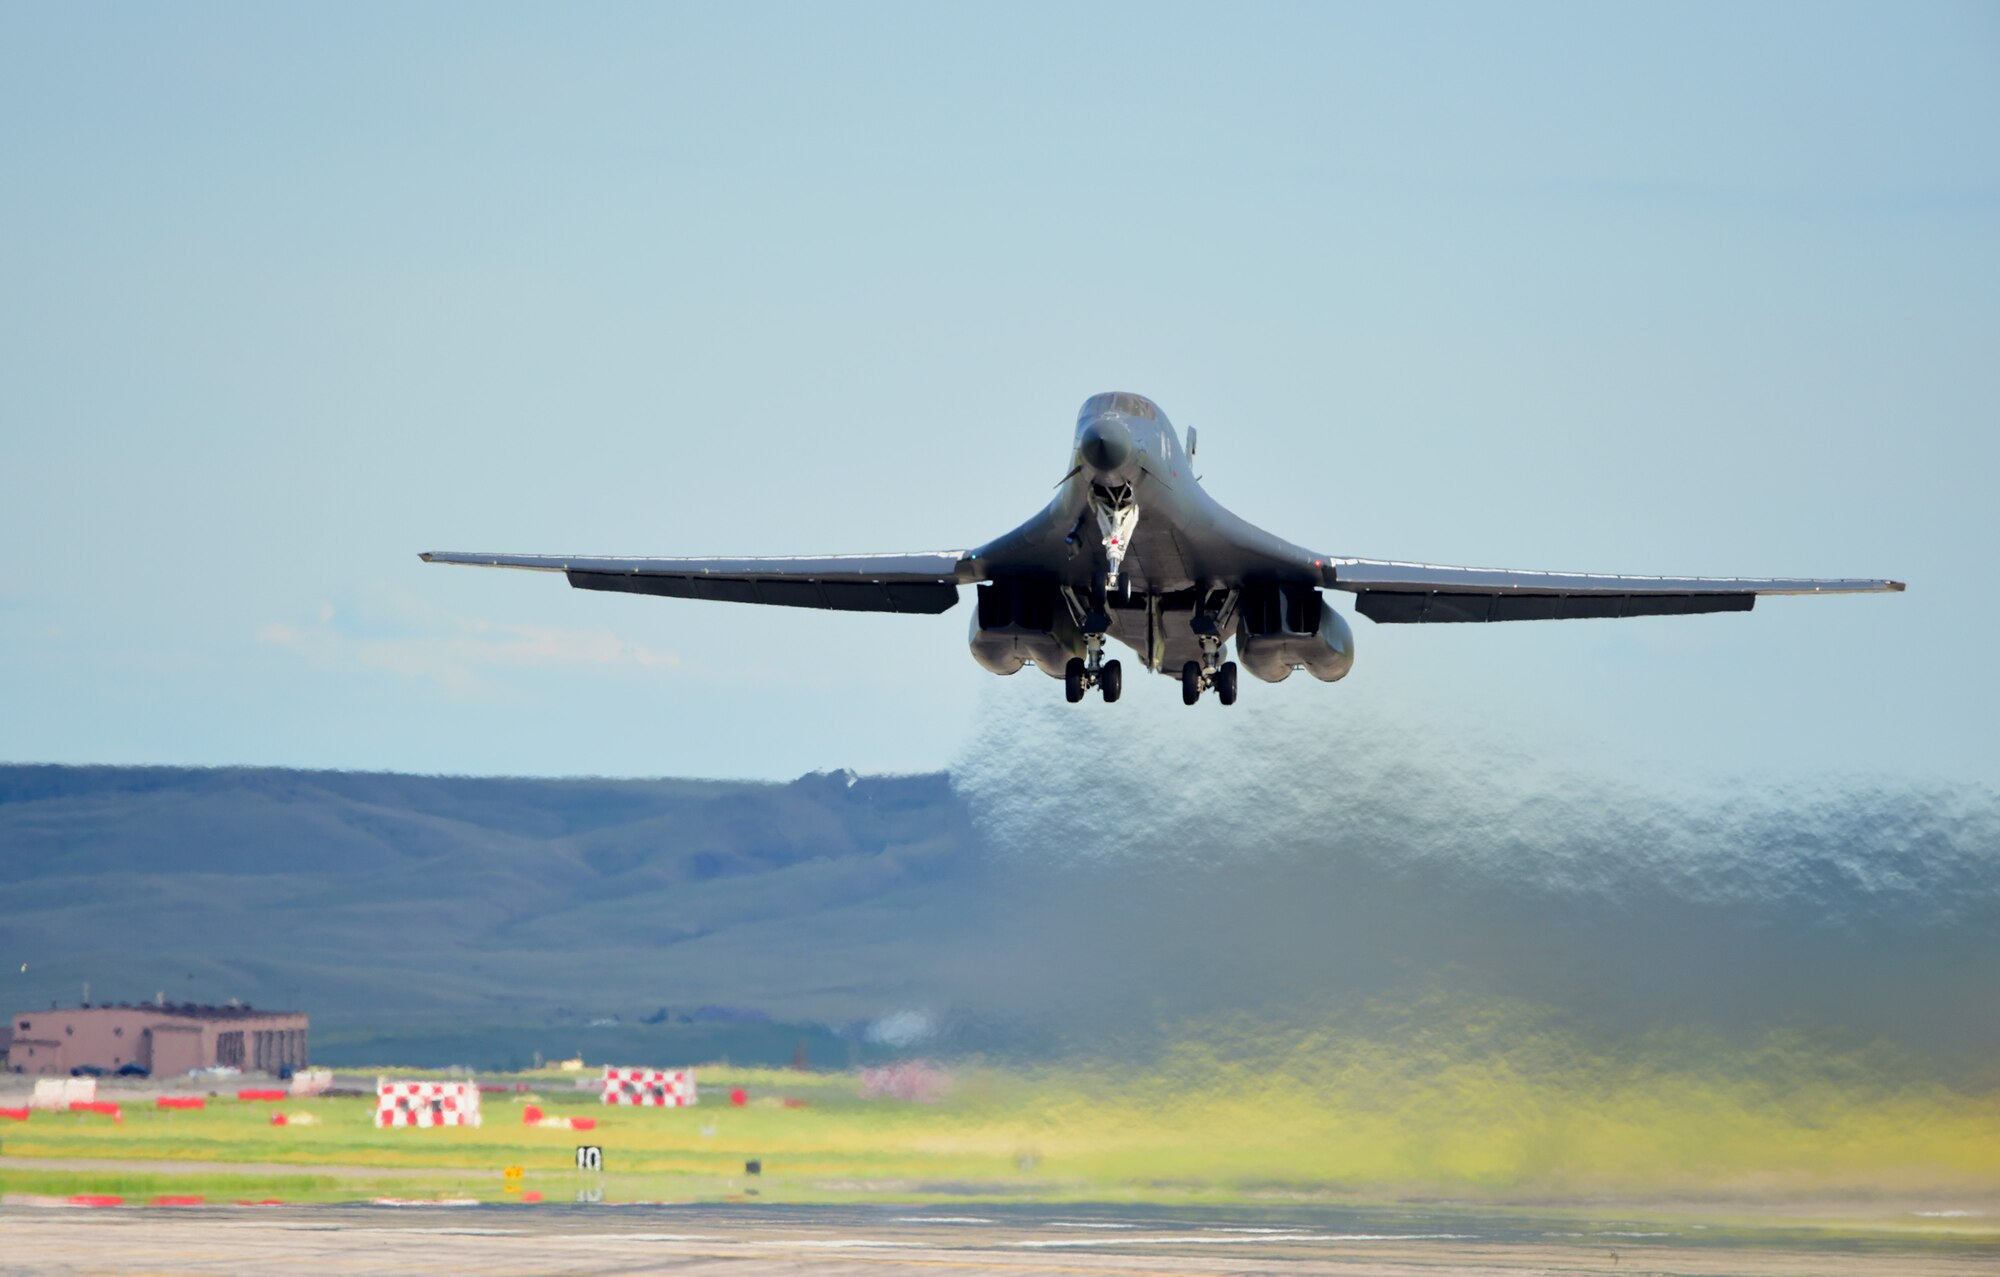 A B-1 bomber takes off from Ellsworth Air Force Base, S.D., to Royal Air Force Fairford, United Kingdom June 6, 2017. The B-1, along with three B-52H Stratofortresses from Barksdale Air Force Base, La., will be supporting a series of multiple joint, multinational exercises. (U.S. Air Force photo by Senior Airman James L. Miller)